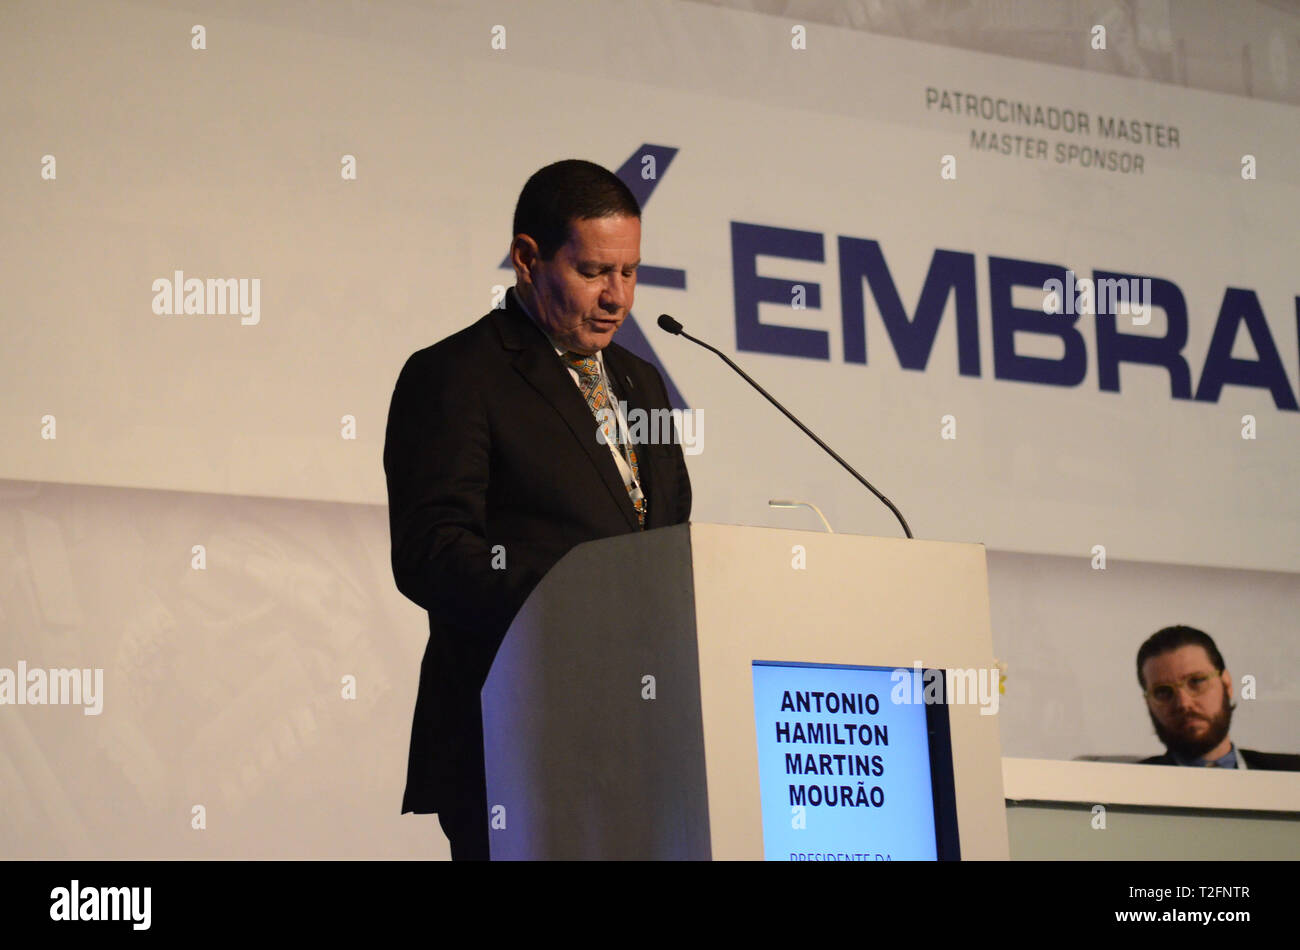 RIO DE JANEIRO, RJ - 02.04.2019: LAAD DEFENCE E SECURITY 2019 - Hamilton Mourão, acting president, during the LAAD Defense &amp; Security International Defense and Security Fair, the largest and most impot defense and security fair in Latin Americarica. The exhibition brings together manufacturers and suppliers of technologies for the Armed Forces, Special Forces, Police and security managers are held this Tuesday (April 02) to April (05) at the Riocentro convention and events complex in Barra da Tijuca in the western part of the city of Rio de Janeiro, RJ. (Photo: Luiz Gomes/Fotoarena) Stock Photo